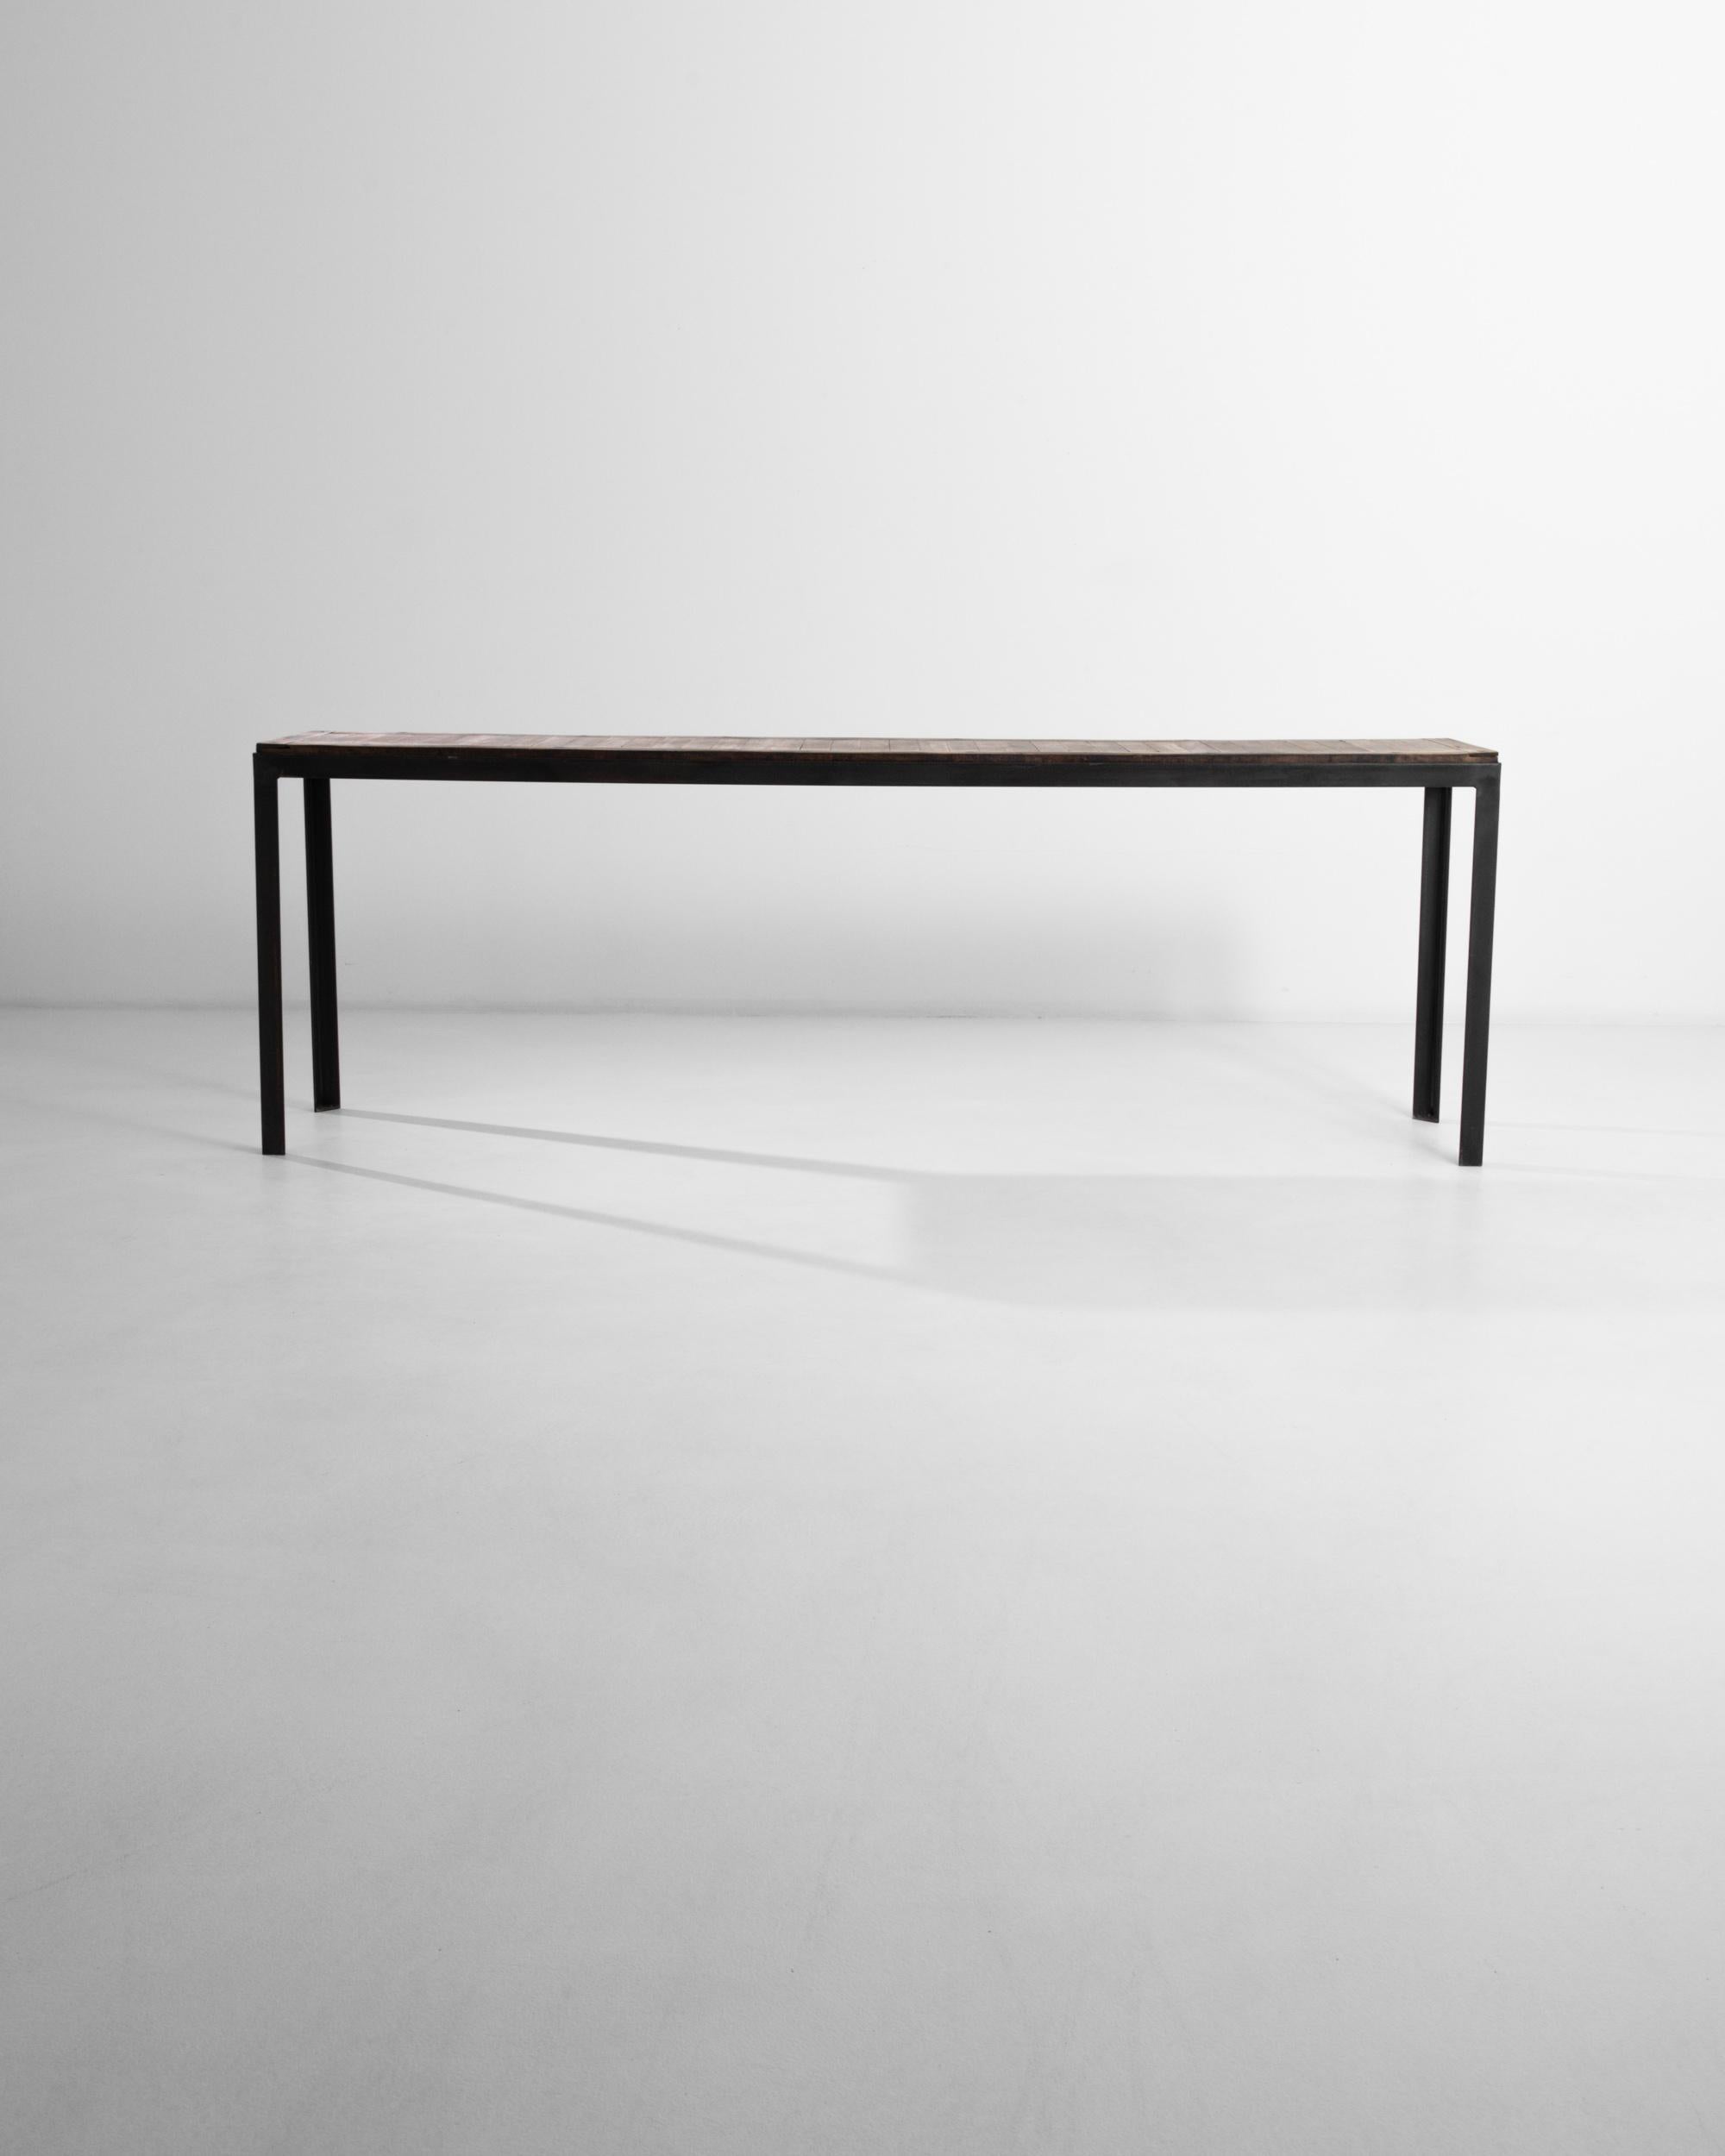 Composed with 20th century architectural salvage from France, this table boasts an industrial steel frame that elevates a wooden table top. The texture of the raw wood enhances the crude minimalist aesthetic of the black-patinated metal base. High